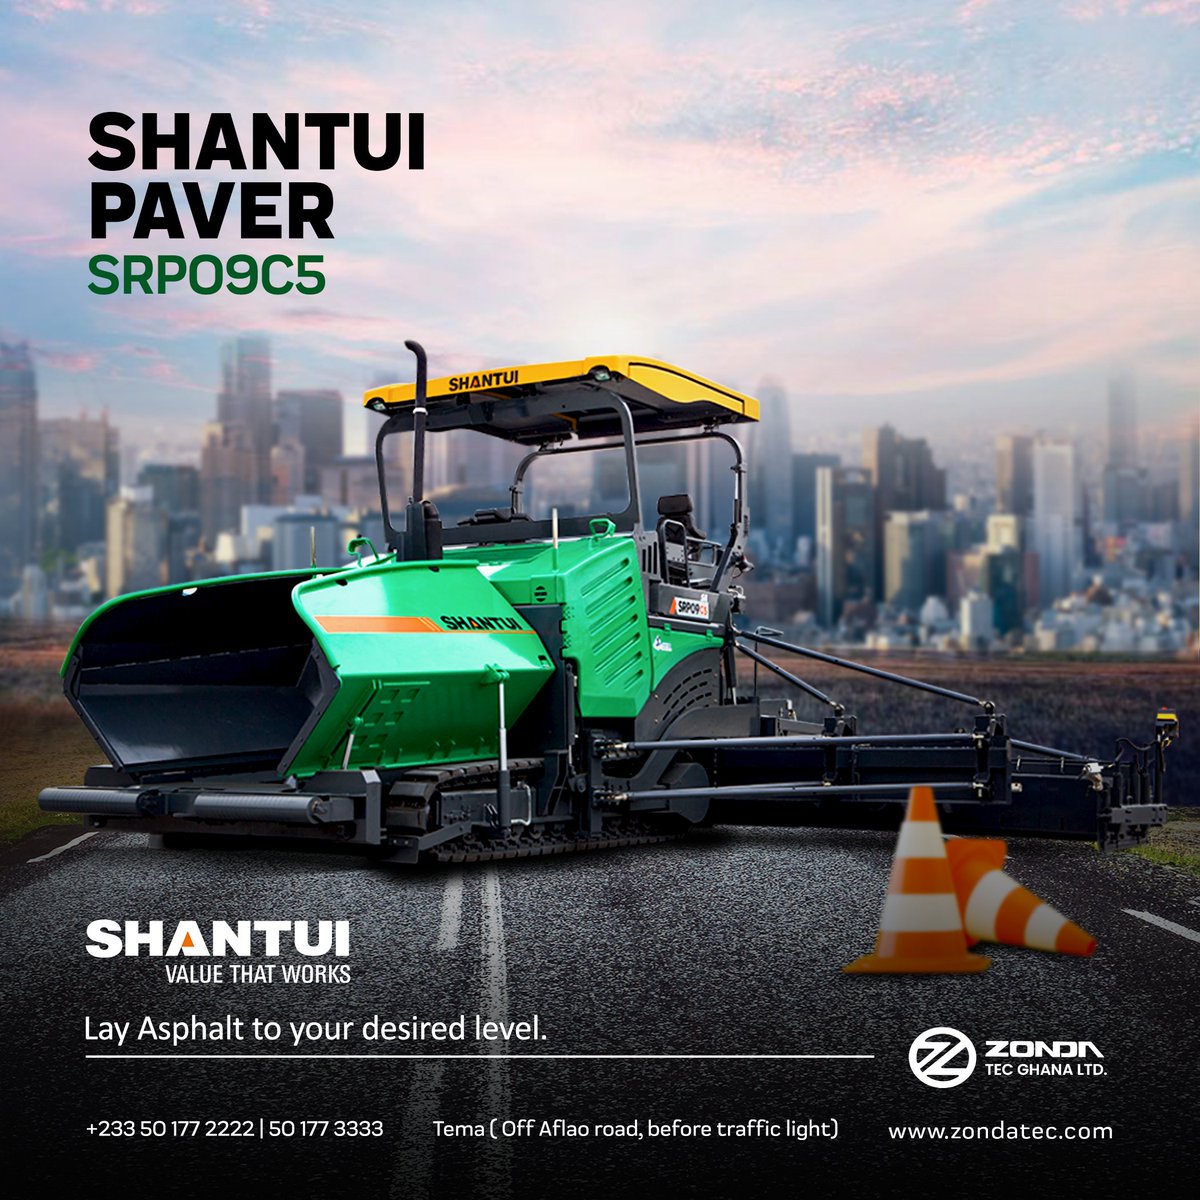 Shantui Paver SRP09C5 lay asphalt to your desire.
#machine #machinery #construction #constructionlife #constructionequipment #constructionequipment #constructioncompany #contractor #contentmarketing